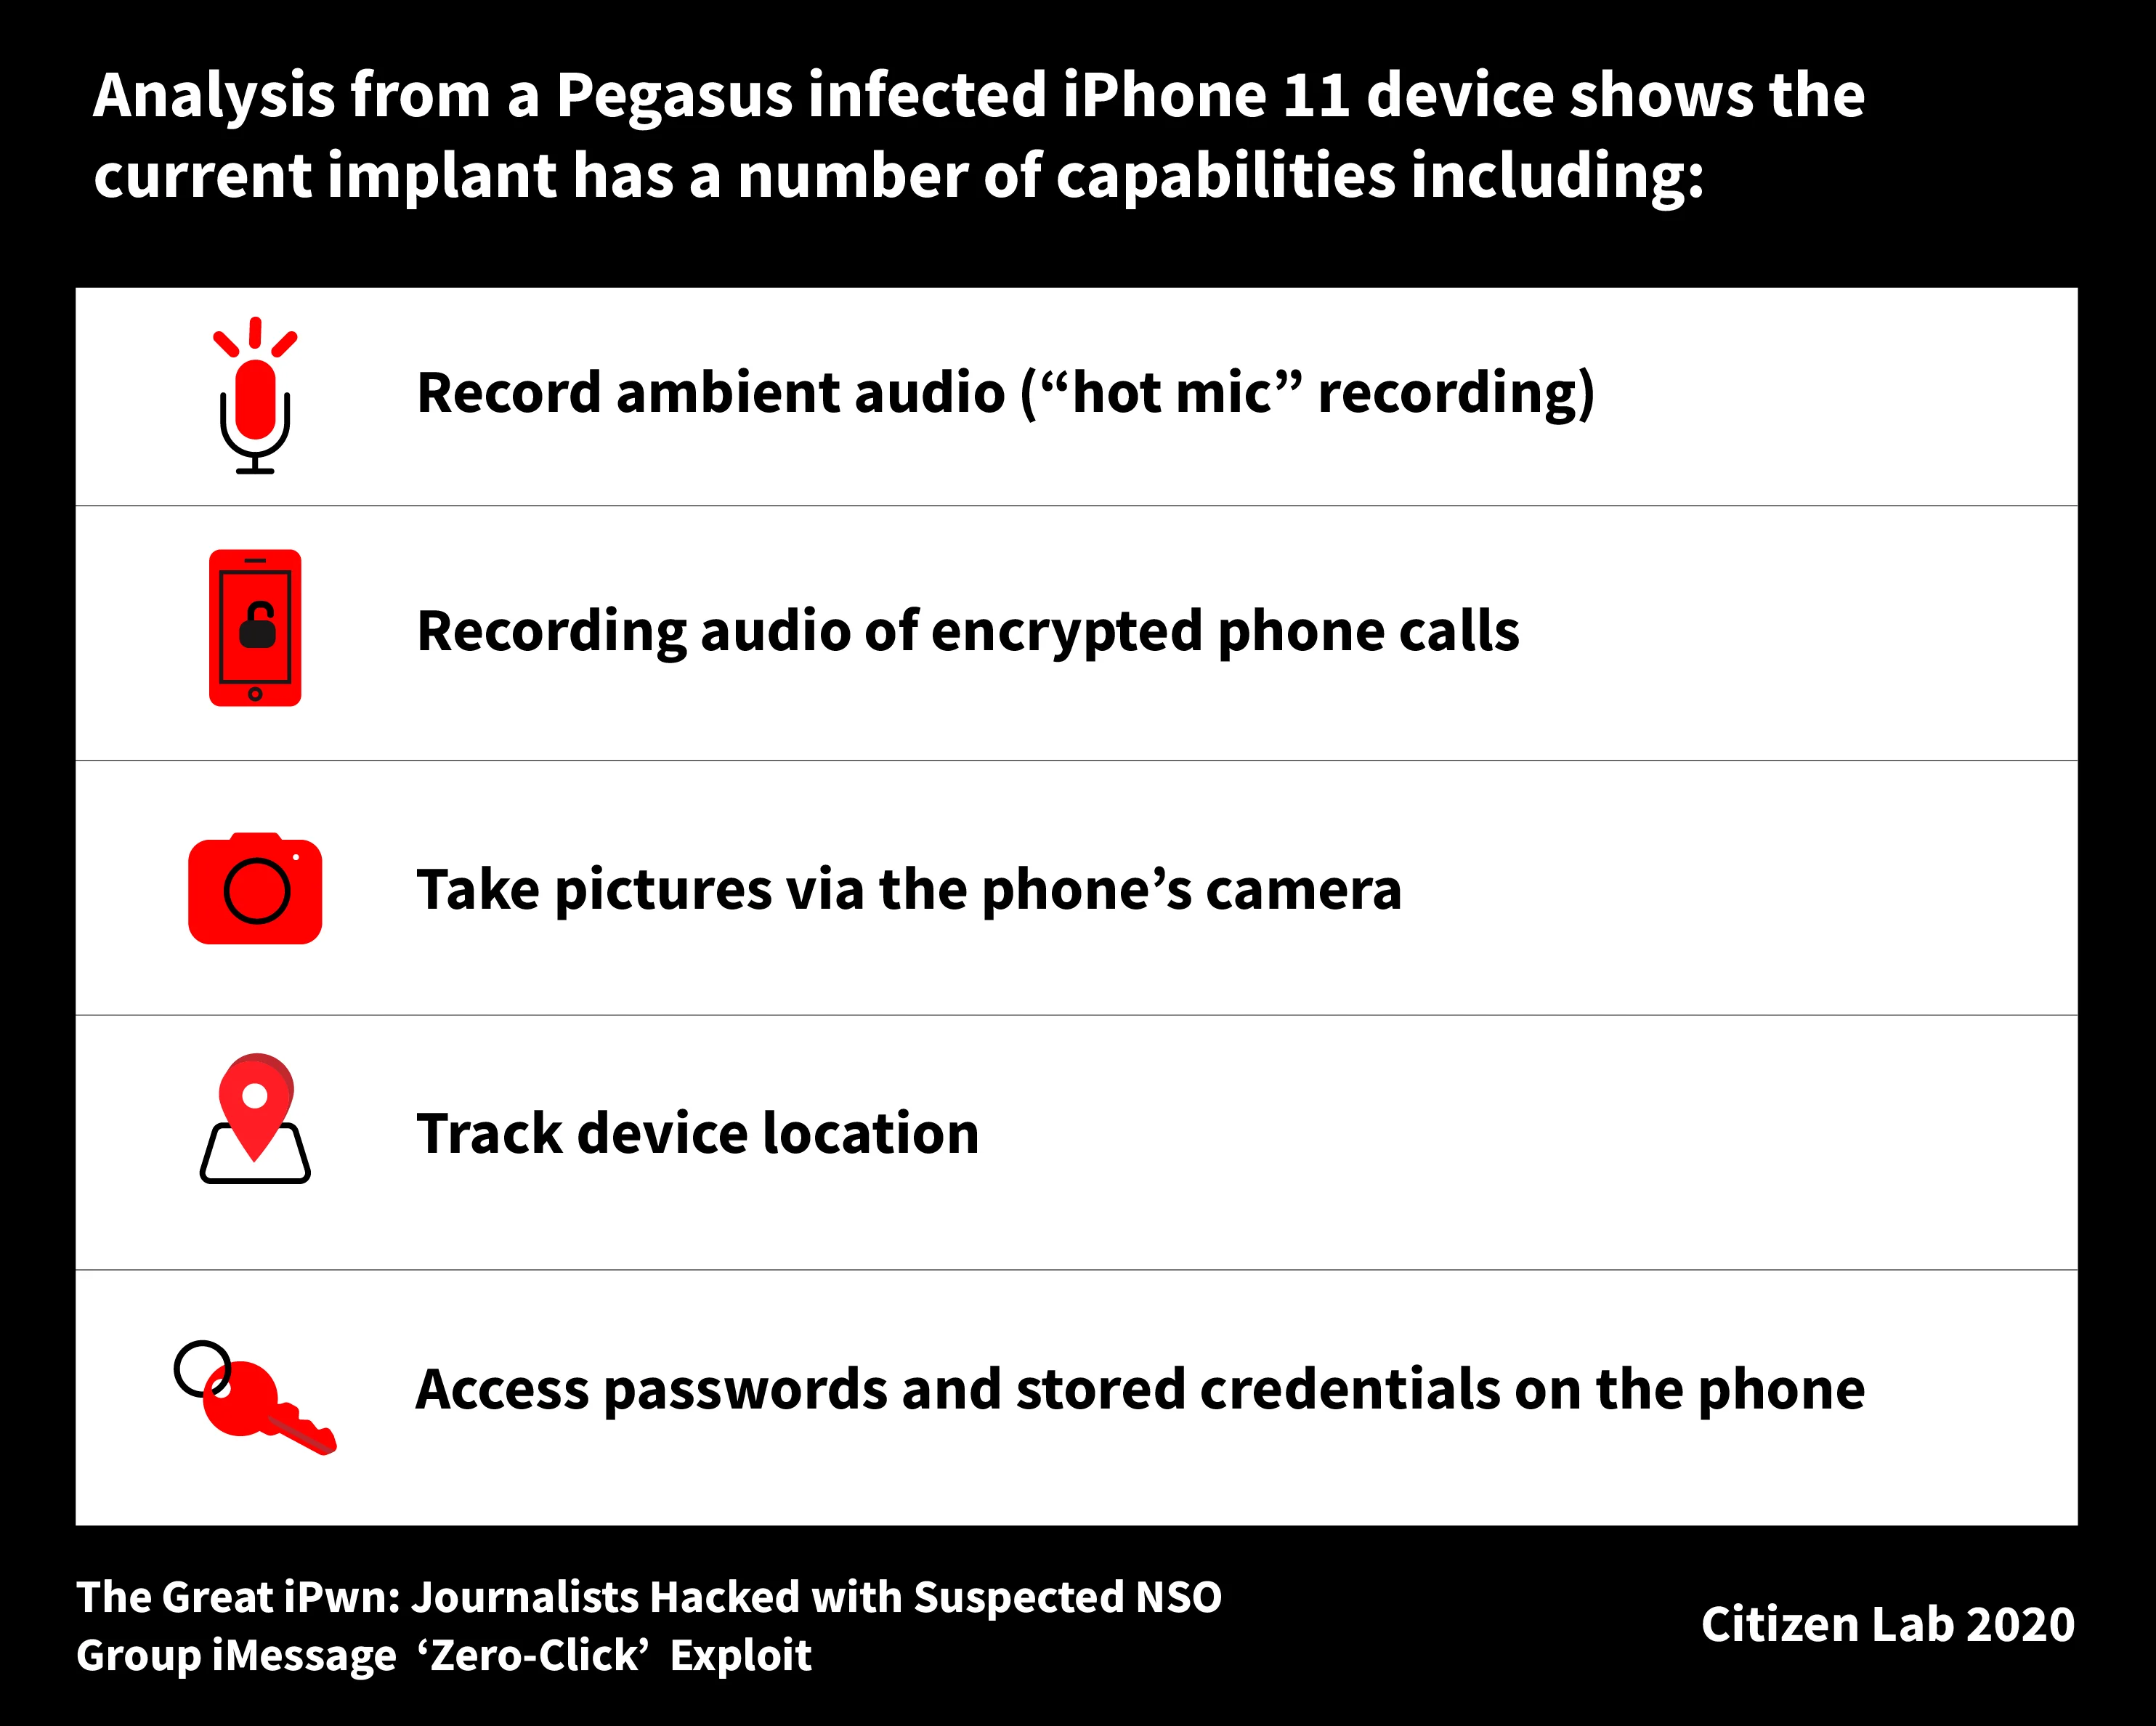 Some Pegasus implant capabilities observed on an infected device.